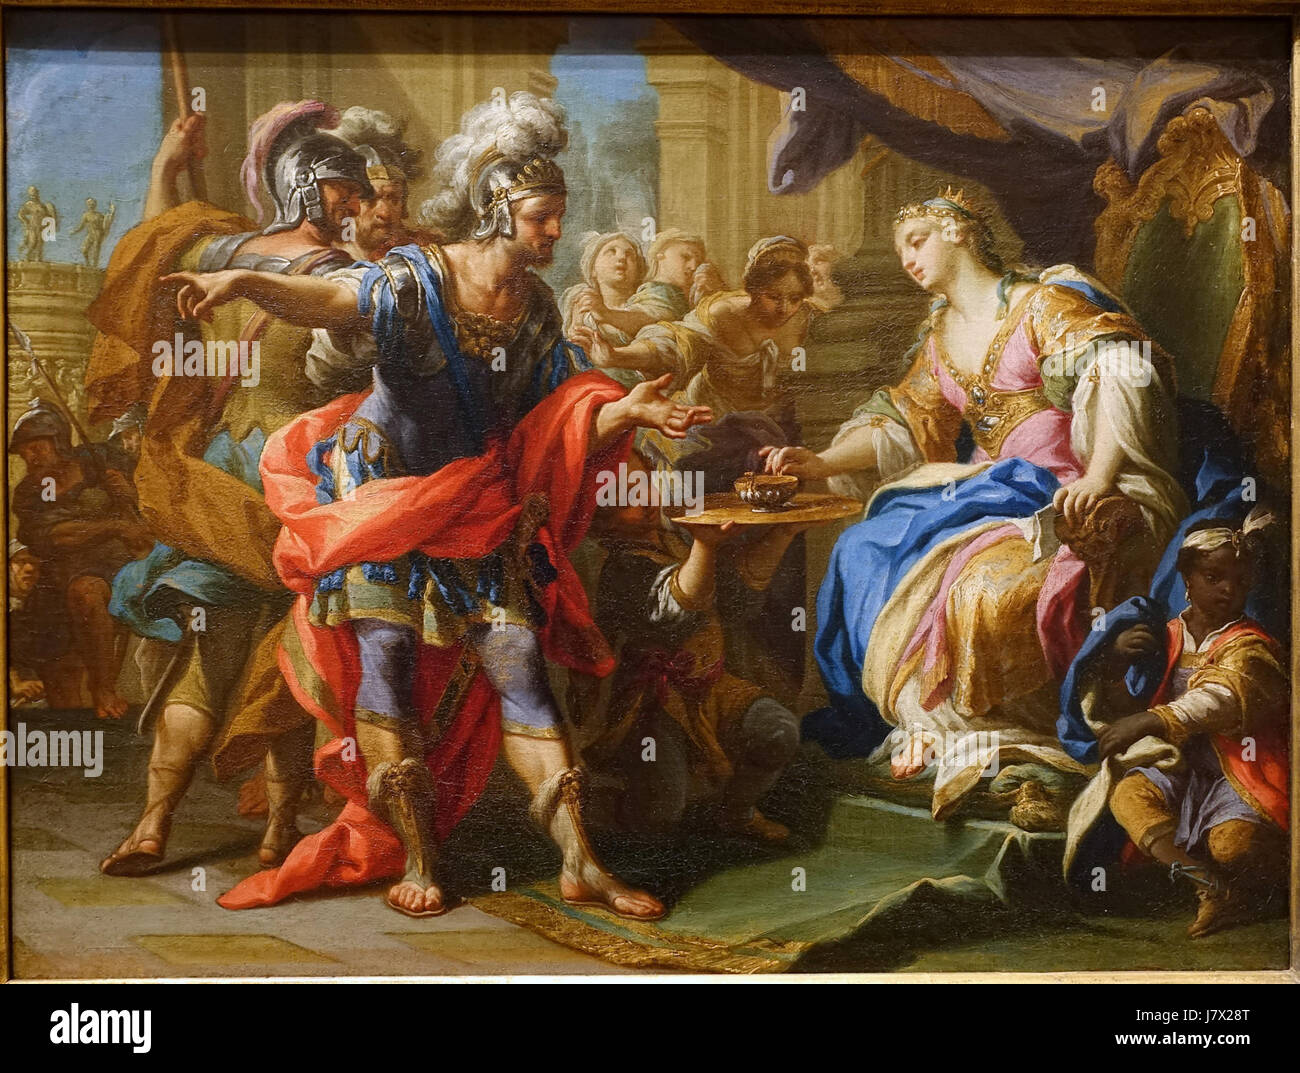 Anthony and Cleopatra, by Andrea Casali, Rome, late 1720s, oil on canvas   Blanton Museum of Art   Austin, Texas   DSC07995 Stock Photo